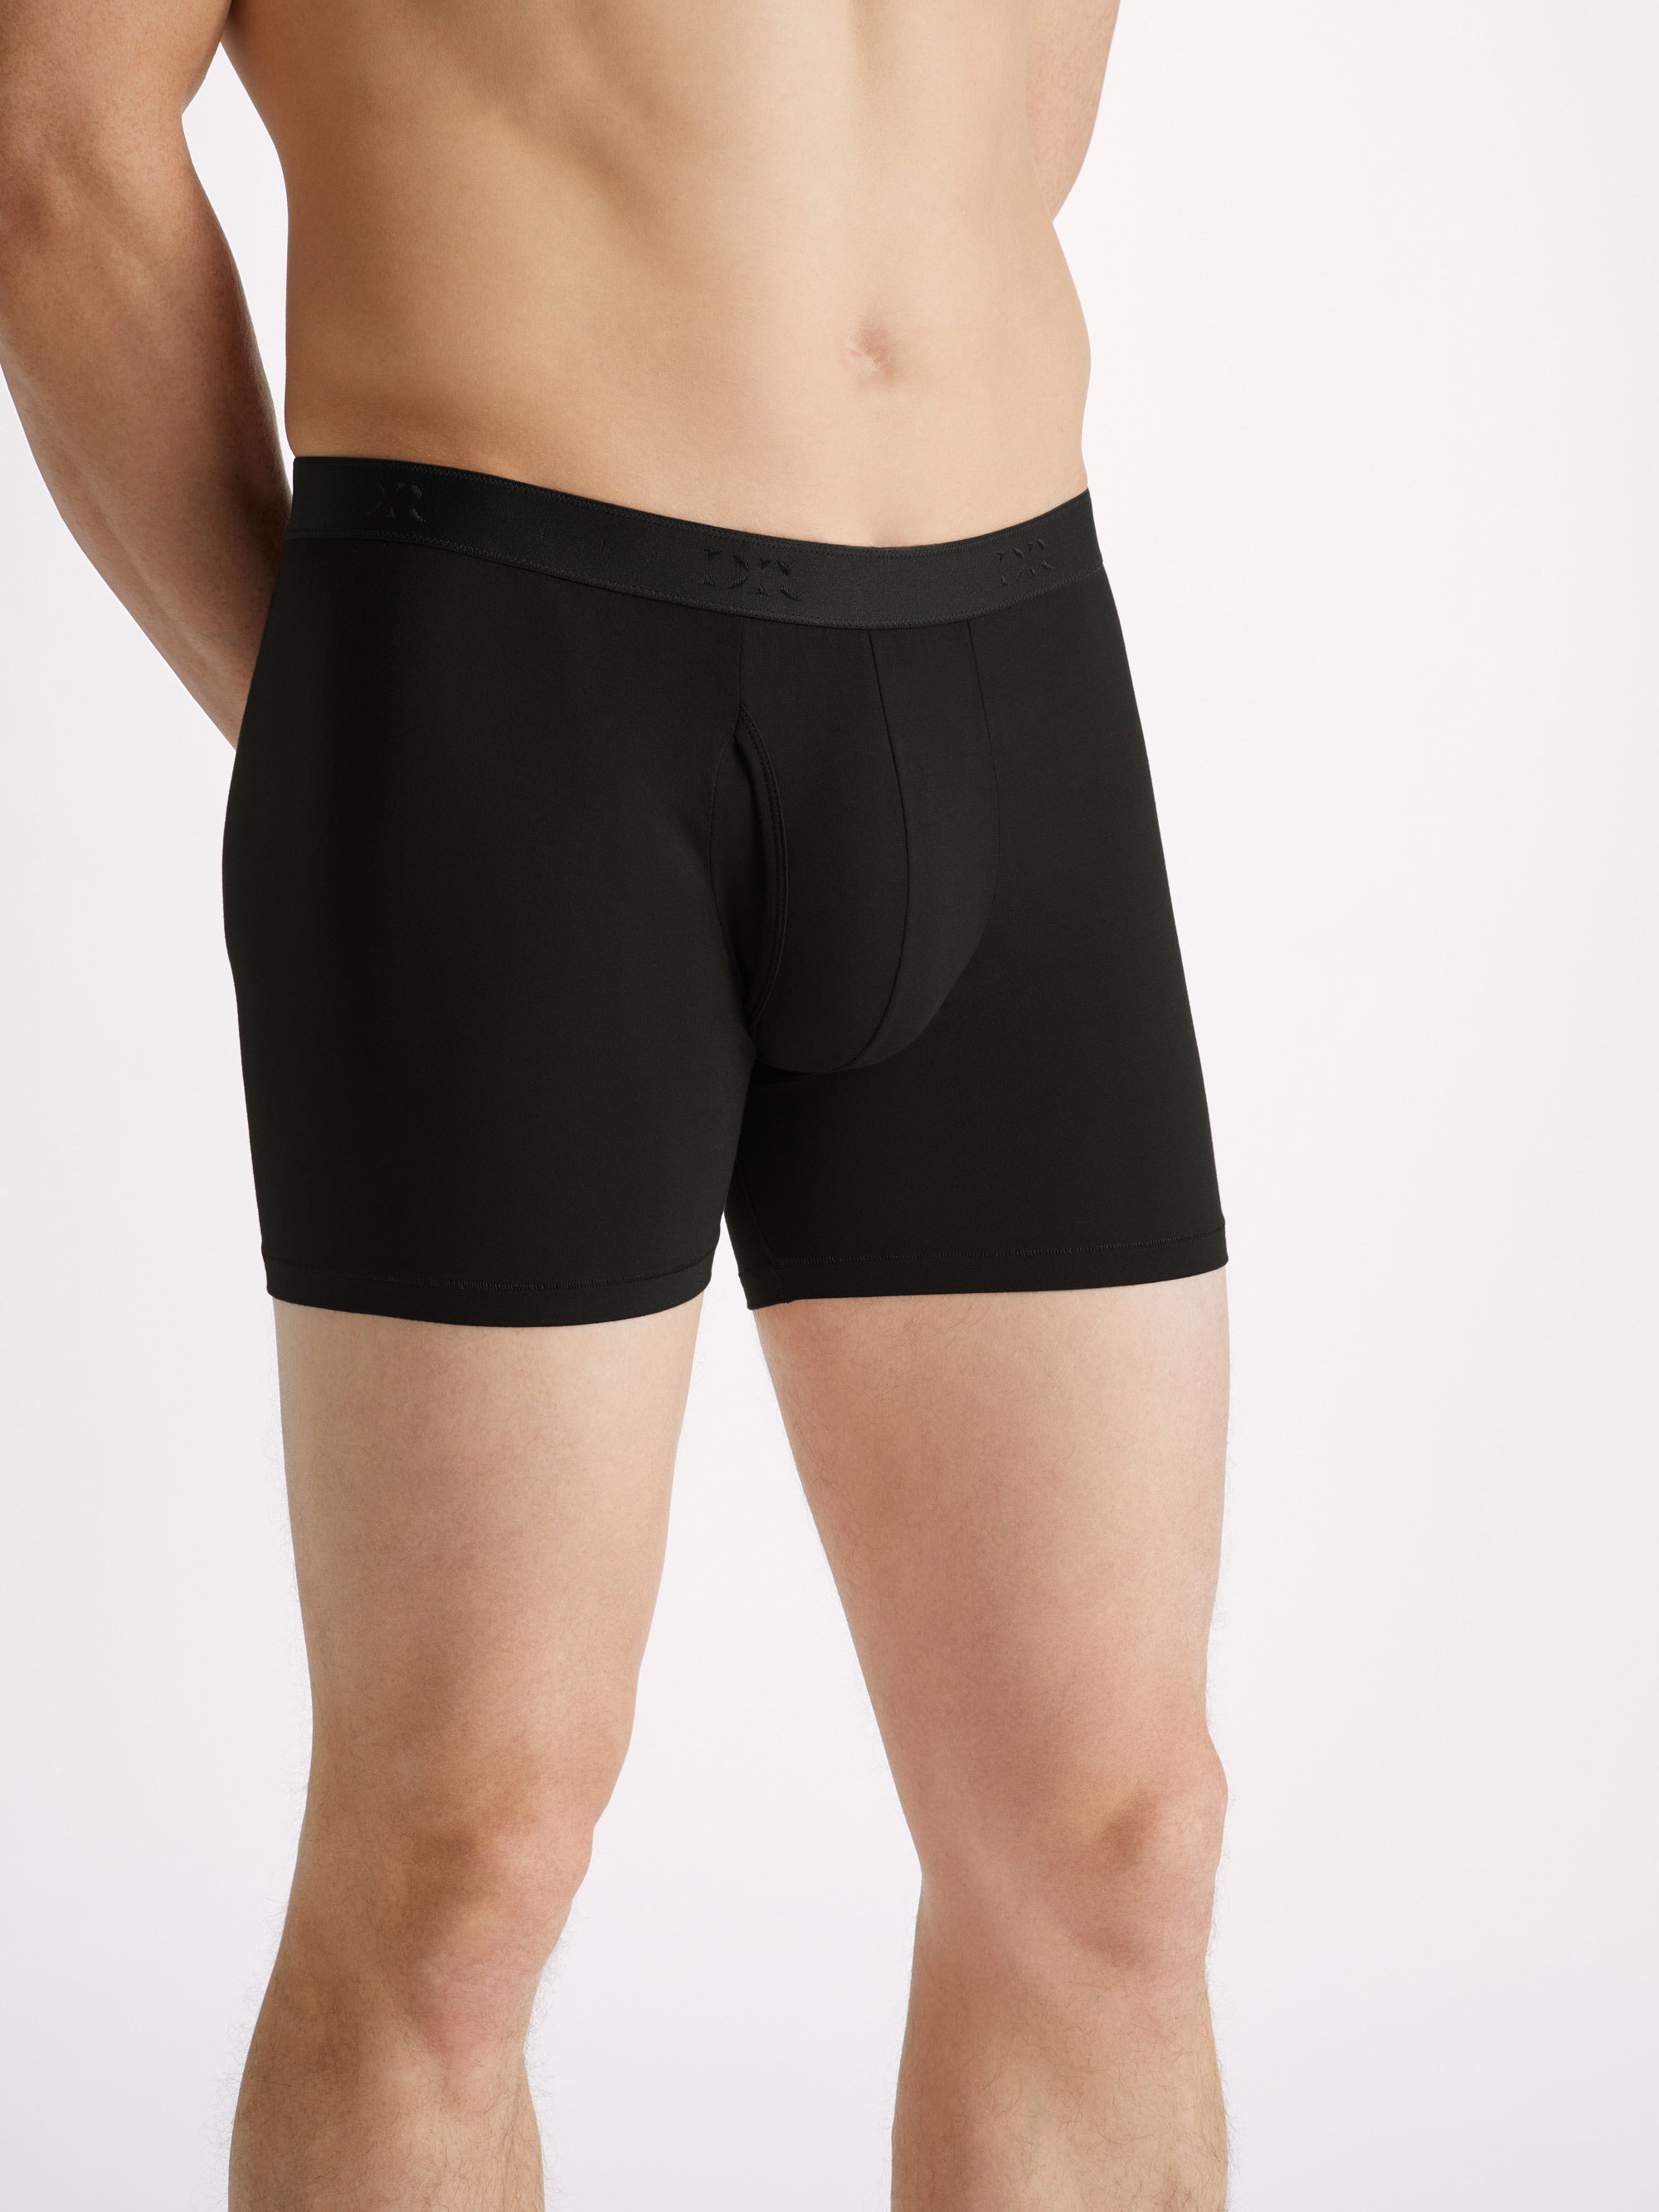 Buy Men's Underwear Micro Modal Trunk with Stretchy Fabric, Anti-Bacterial  and Anti-Roll Waistband (Pack of 2) (S, Black) at